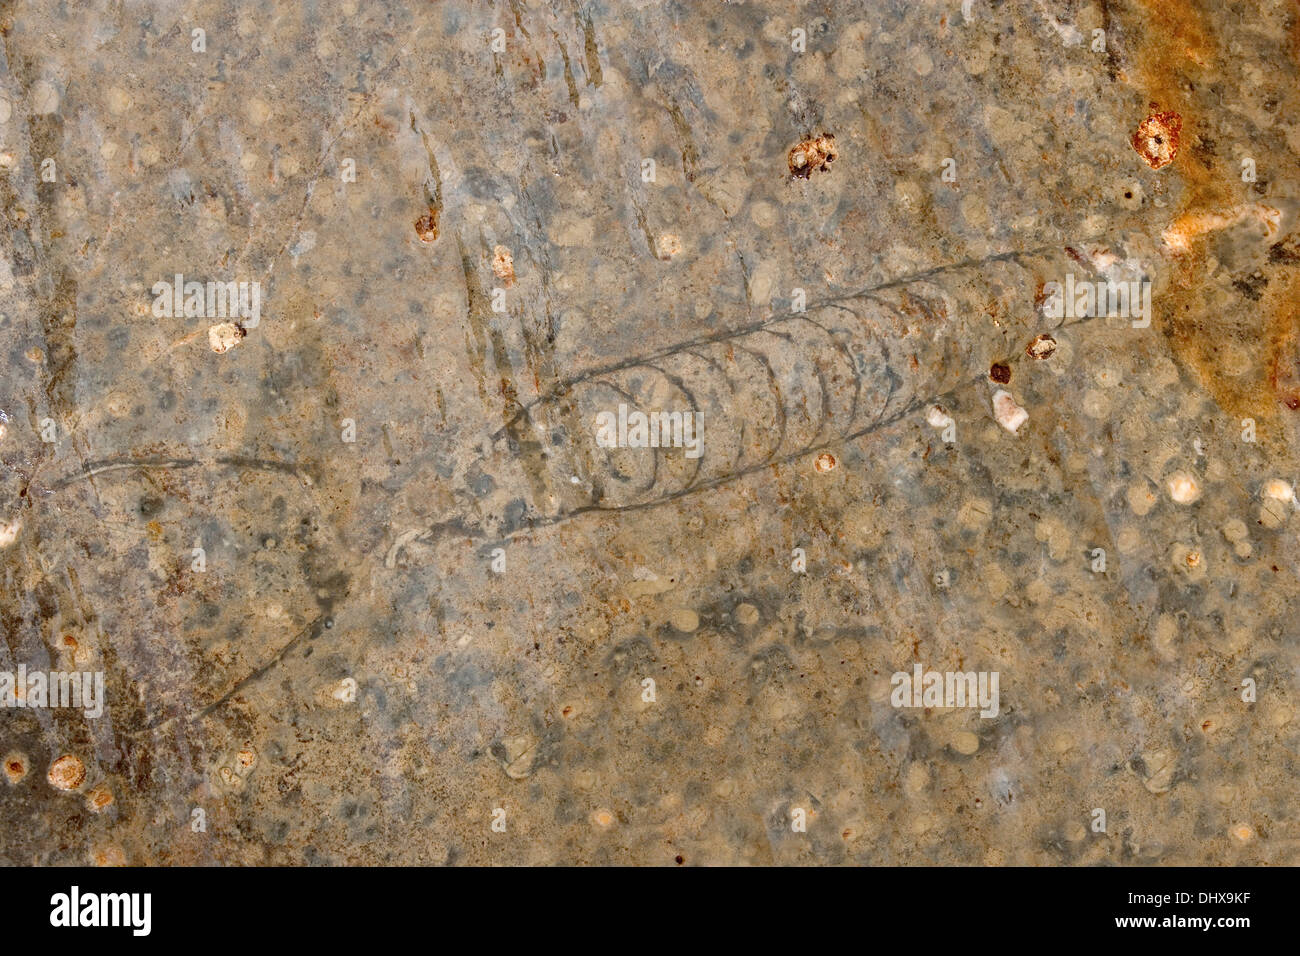 A marine nautiloid fossil from the Paleozoic era found in the Grand Canyon's Mississippian Redwall Limestone layers. Stock Photo